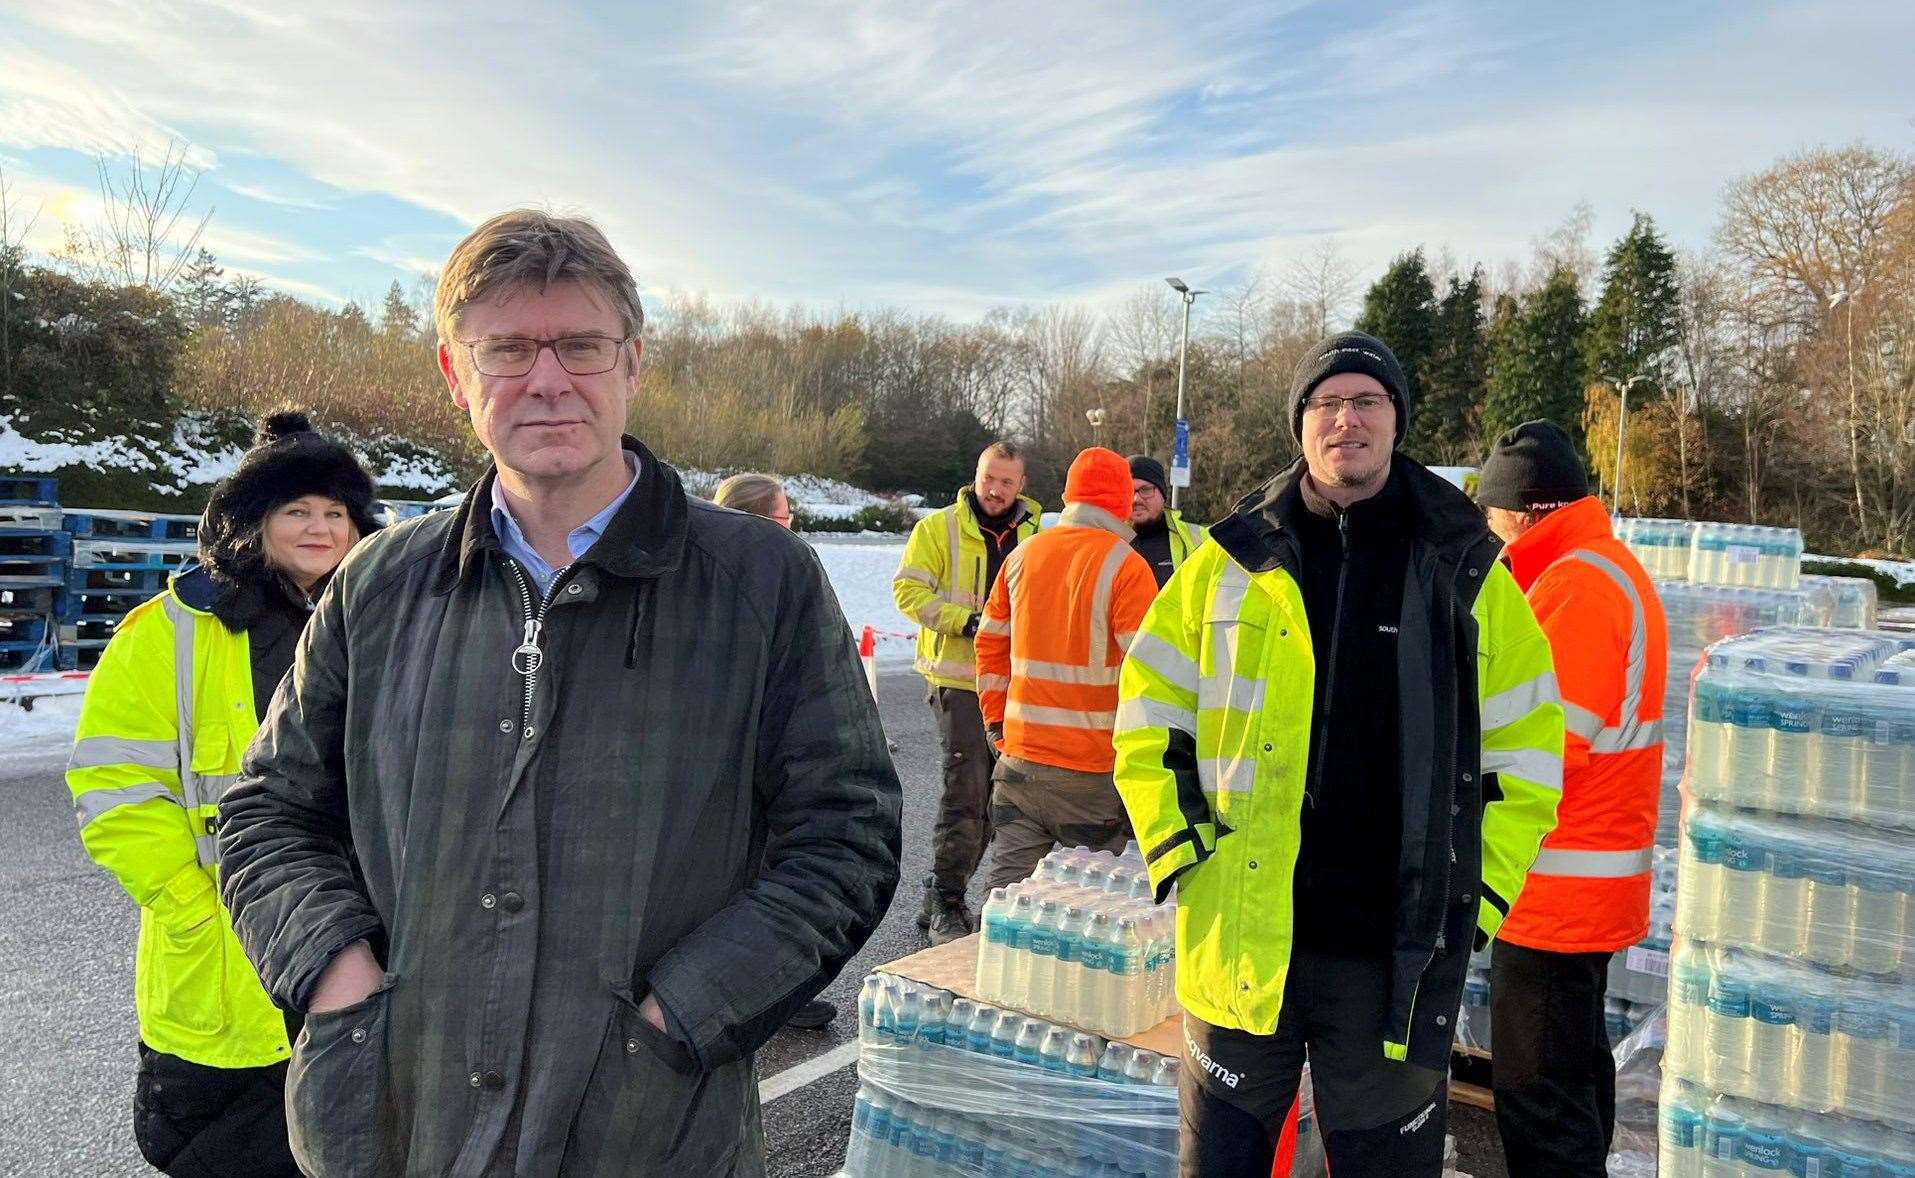 MP Greg Clark held a meeting with South East Water's chief executive